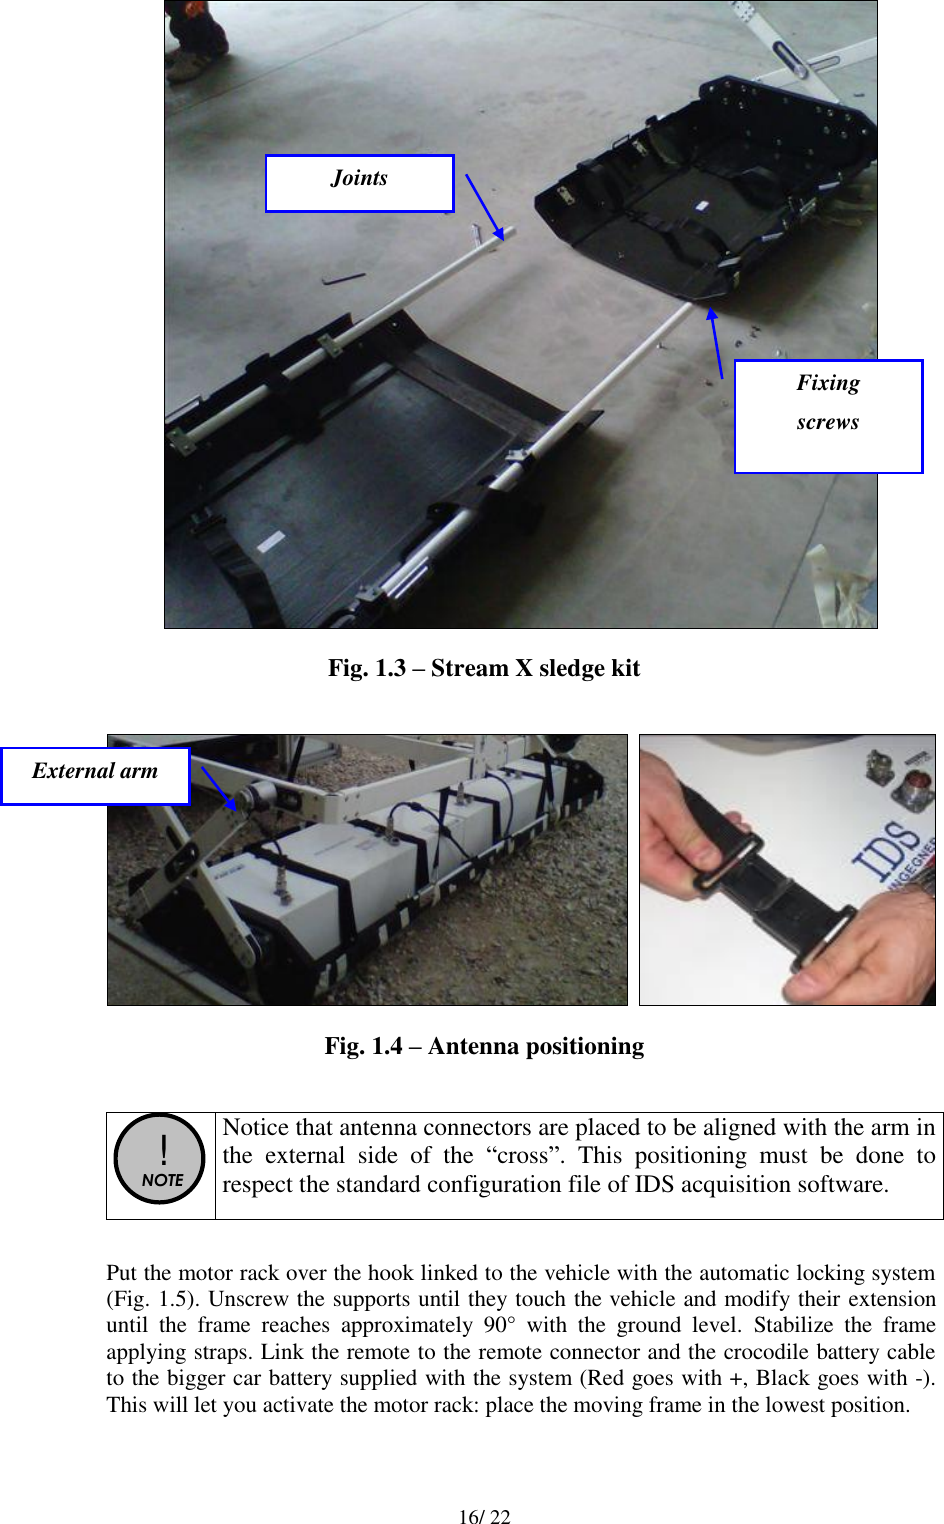   16/ 22  Fig. 1.3 – Stream X sledge kit      Fig. 1.4 – Antenna positioning   !  NOTE  Notice that antenna connectors are placed to be aligned with the arm in the  external  side  of  the  “cross”.  This  positioning  must  be  done  to respect the standard configuration file of IDS acquisition software.  Put the motor rack over the hook linked to the vehicle with the automatic locking system (Fig. 1.5). Unscrew the supports until they touch the vehicle and modify their extension until  the  frame  reaches  approximately  90°  with  the  ground  level.  Stabilize  the  frame applying straps. Link the remote to the remote connector and the crocodile battery cable to the bigger car battery supplied with the system (Red goes with +, Black goes with -). This will let you activate the motor rack: place the moving frame in the lowest position. Joints Fixing  screws External arm 